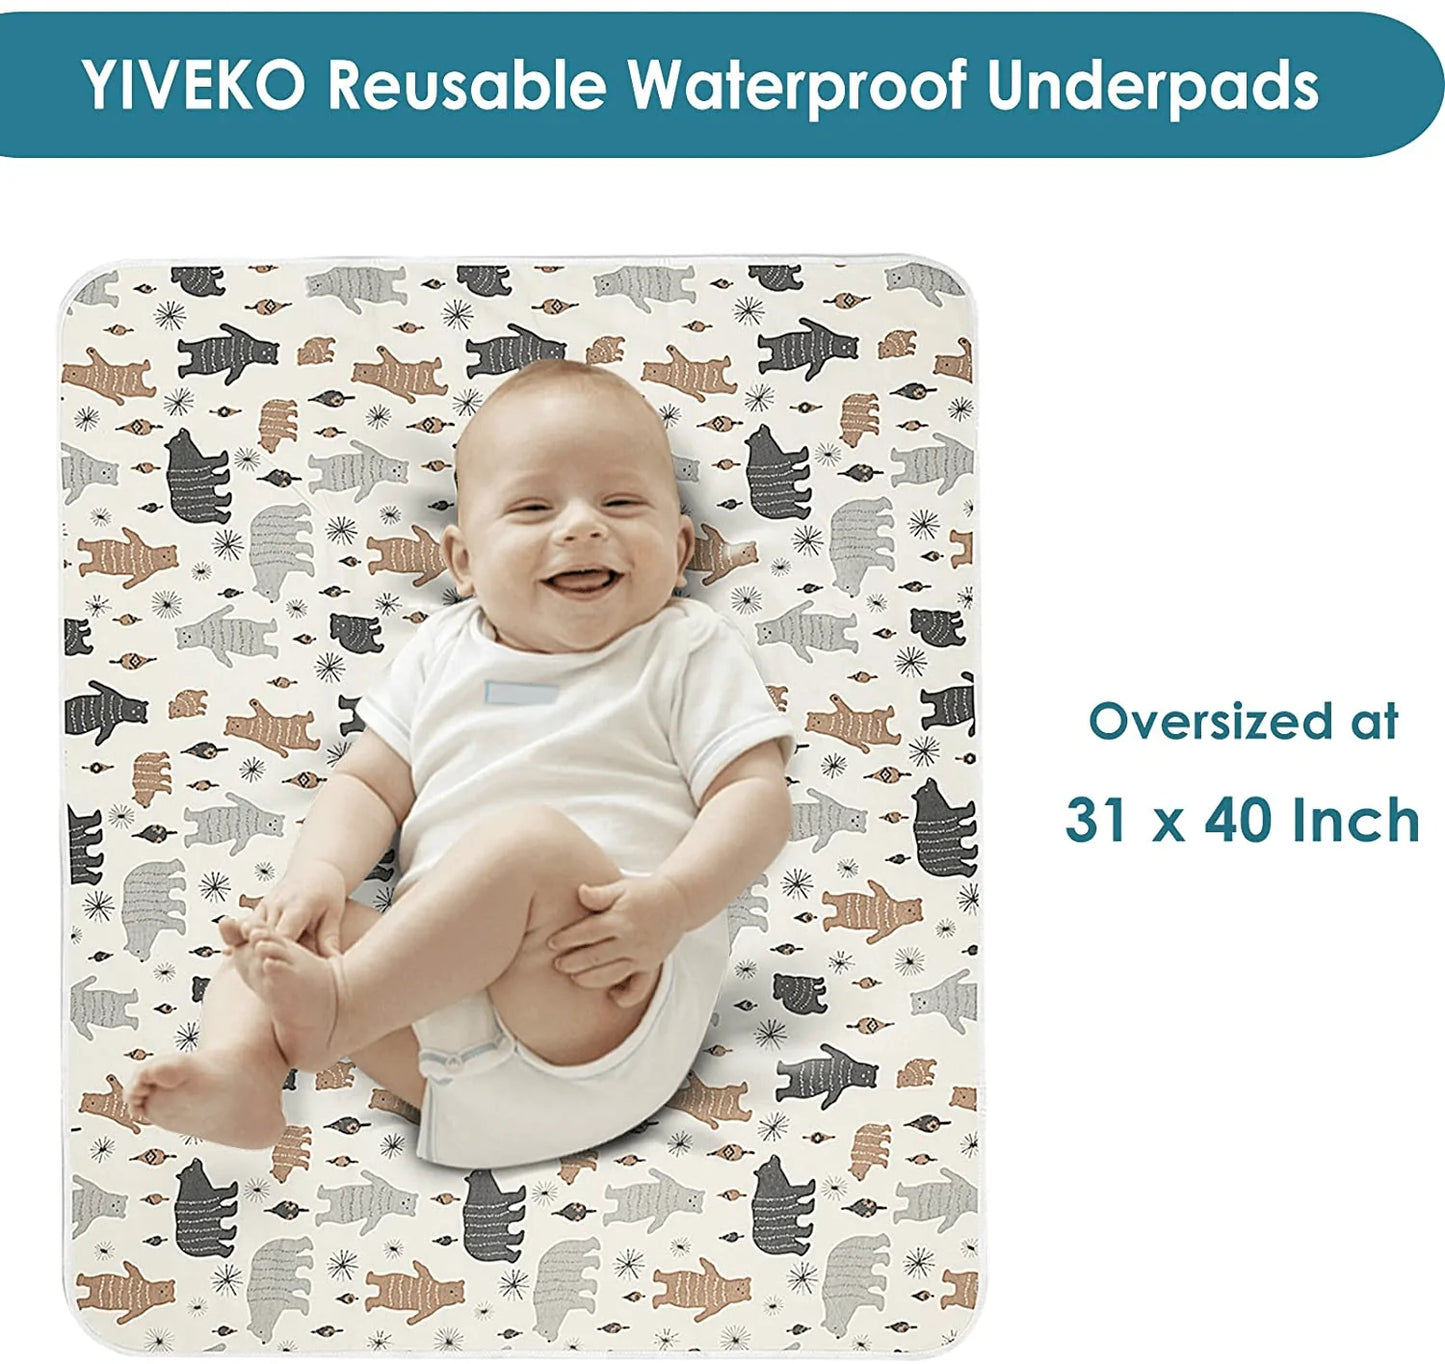 YIVEKO Baby Waterproof Bed Pad Washable Mattress Pad Reusable Underpads Bed Wetting Incontinence Cover for Baby Toddler Children and Adults